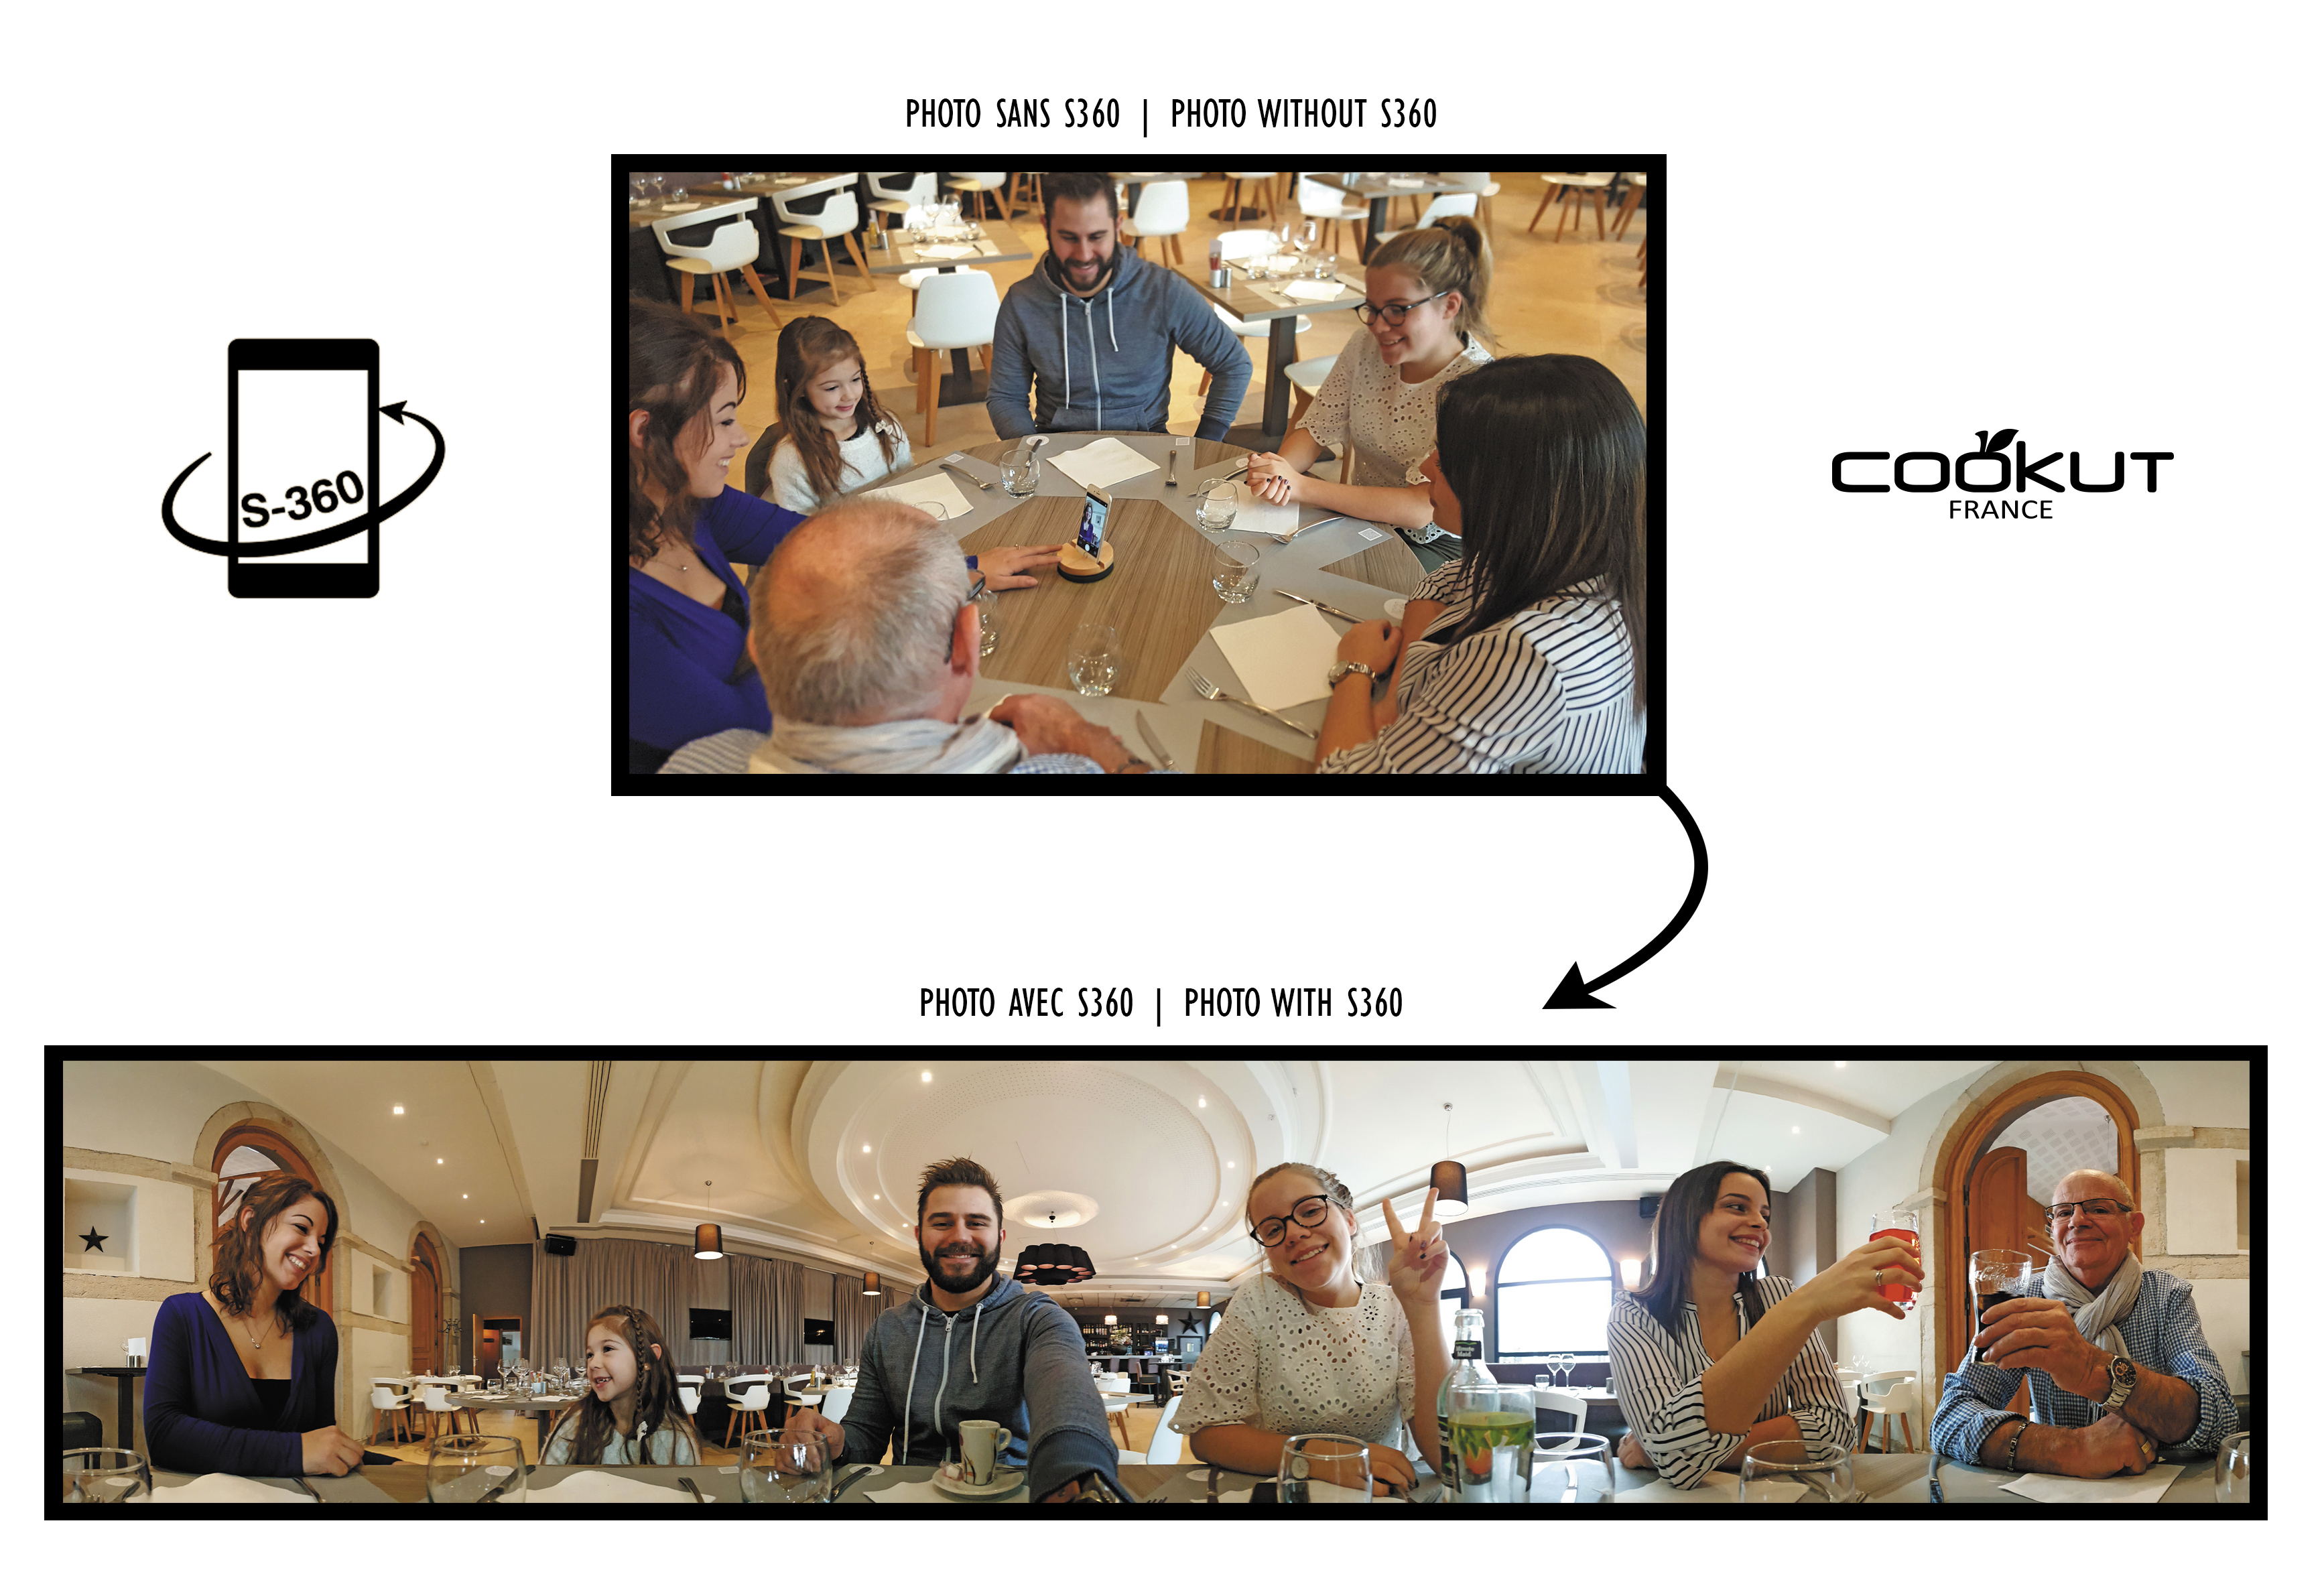 Cookut, changing the world through cooking at home - Maison&Objet